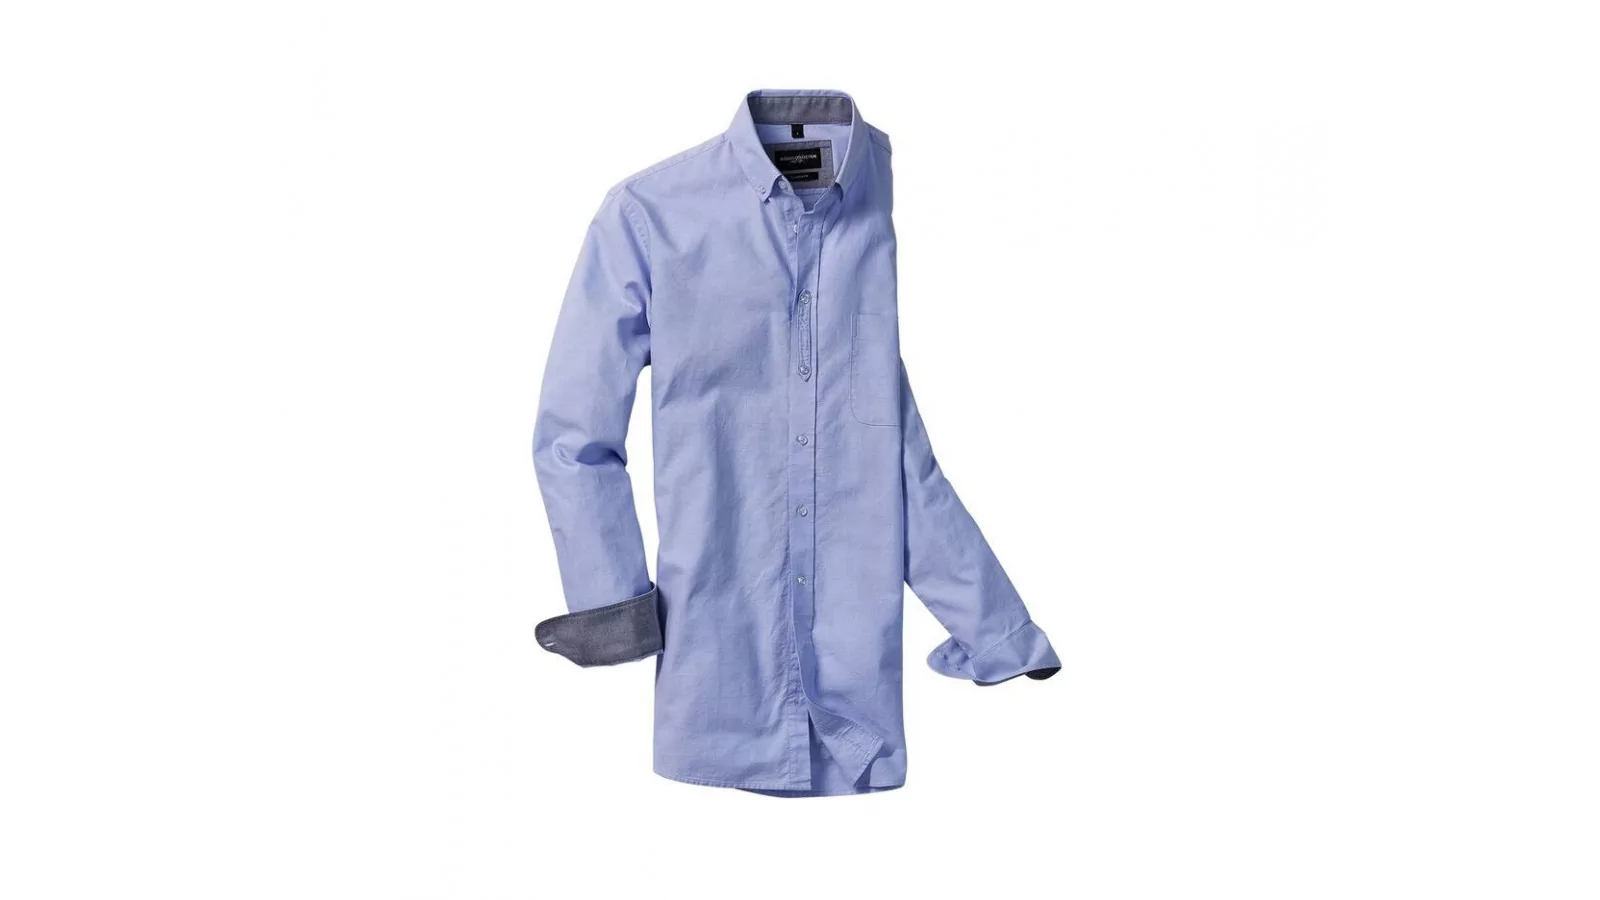 Chemise couture OXFORD